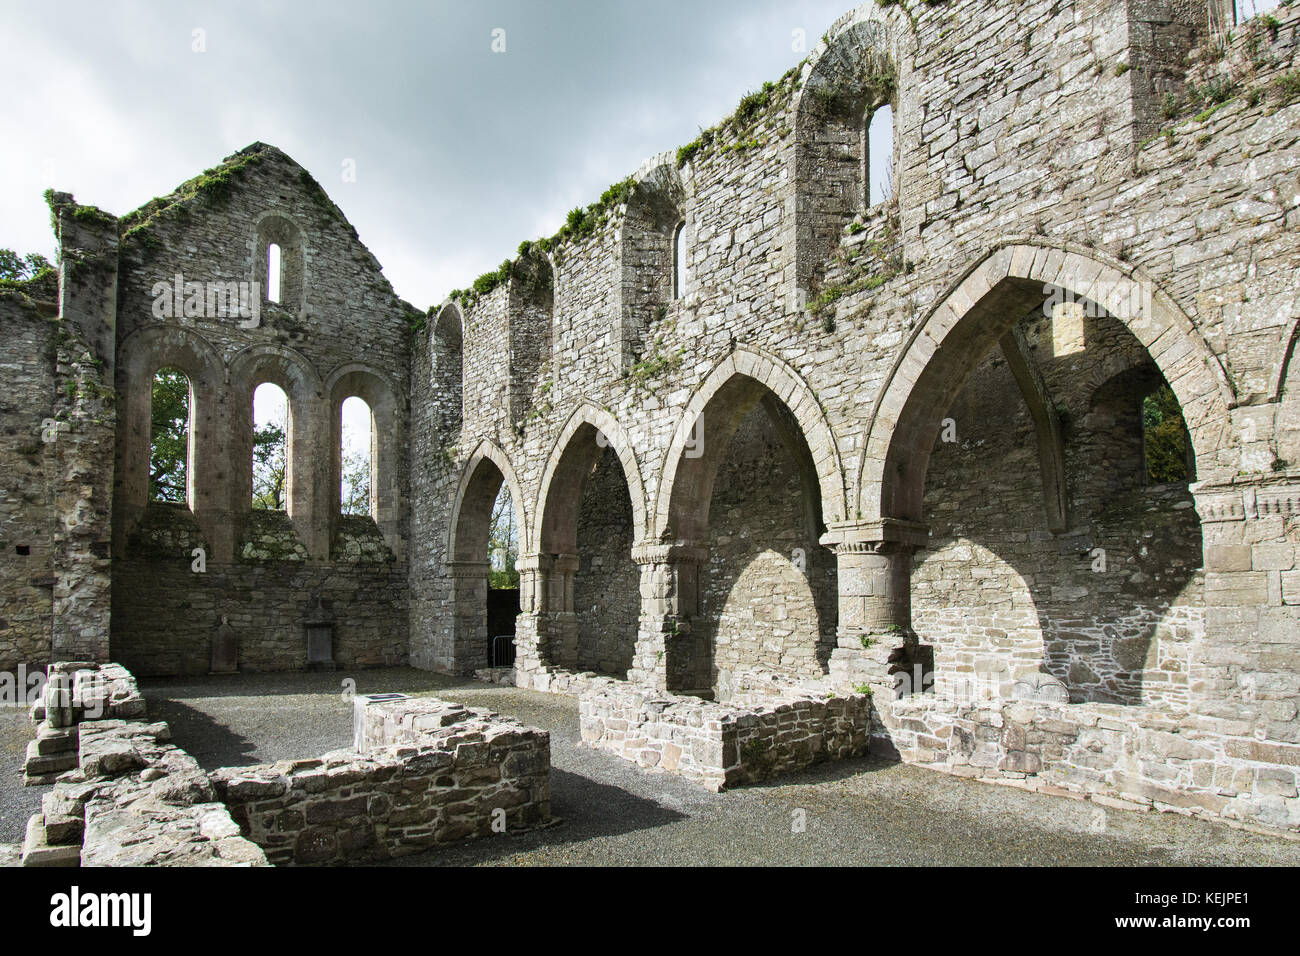 Ruins of Jerpoint Abbey,Kilkenny, Ireland, a medieval Cistercian Abbey, destroyed at the Dissolution of the monasteries under Henry the Eight Stock Photo